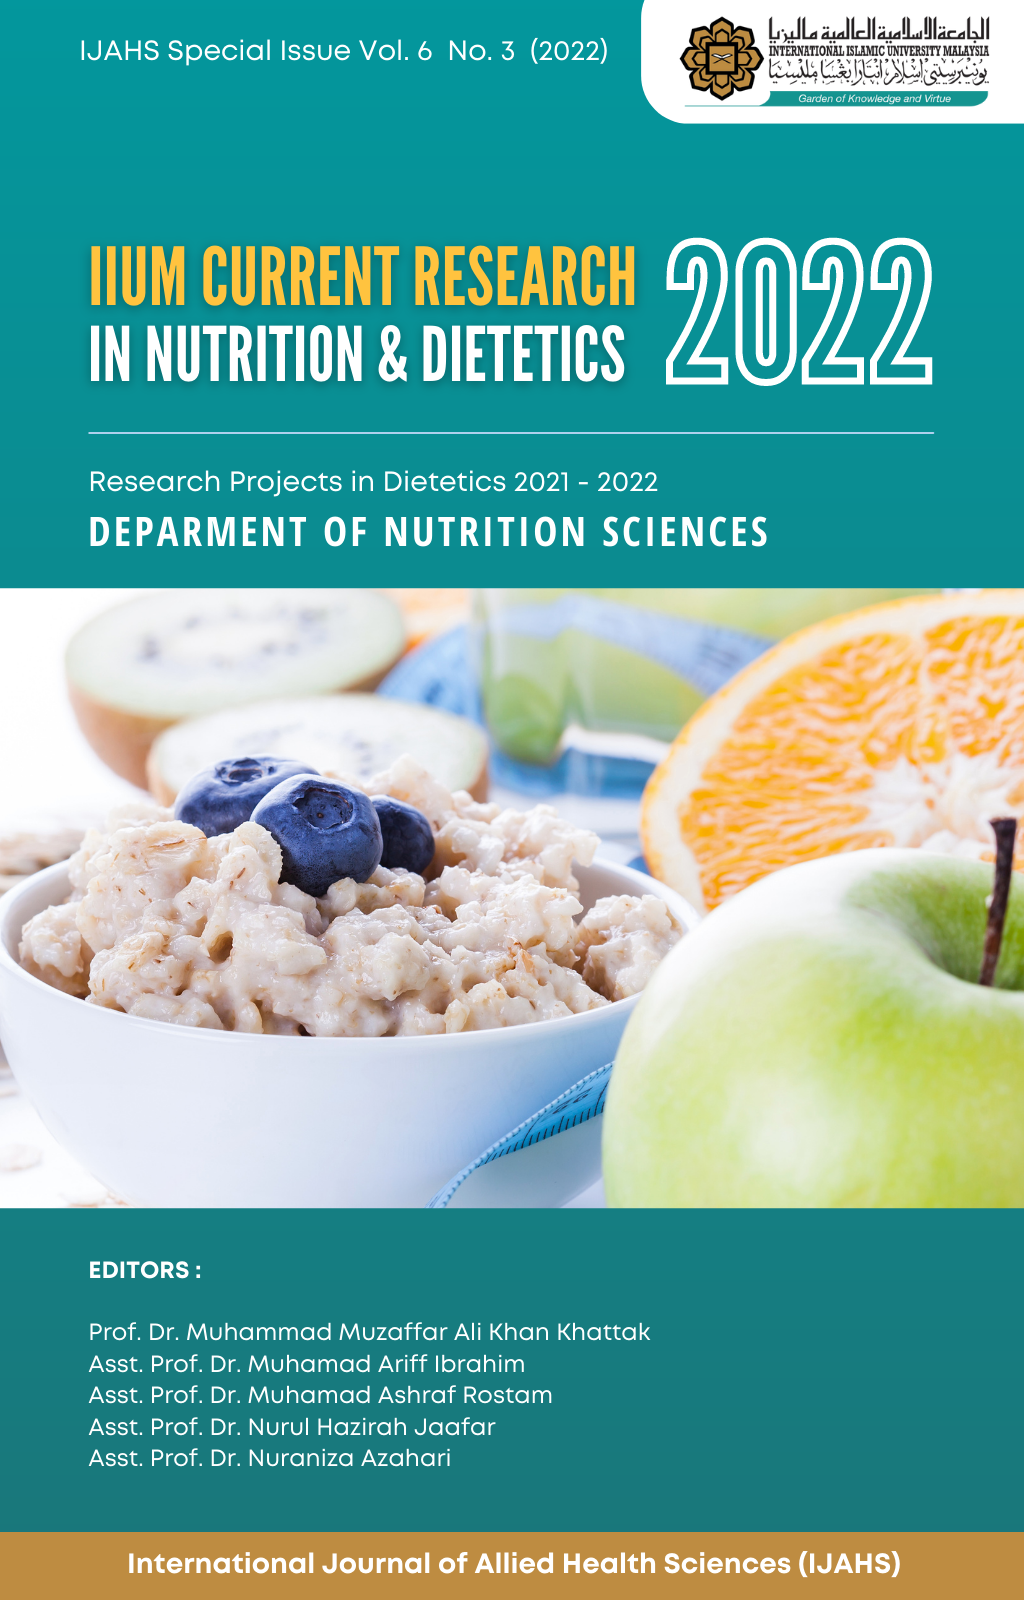 					View Vol. 6 No. 3 (2022): Special Issue: IIUM Current Research in Nutrition & Dietetics 2022
				